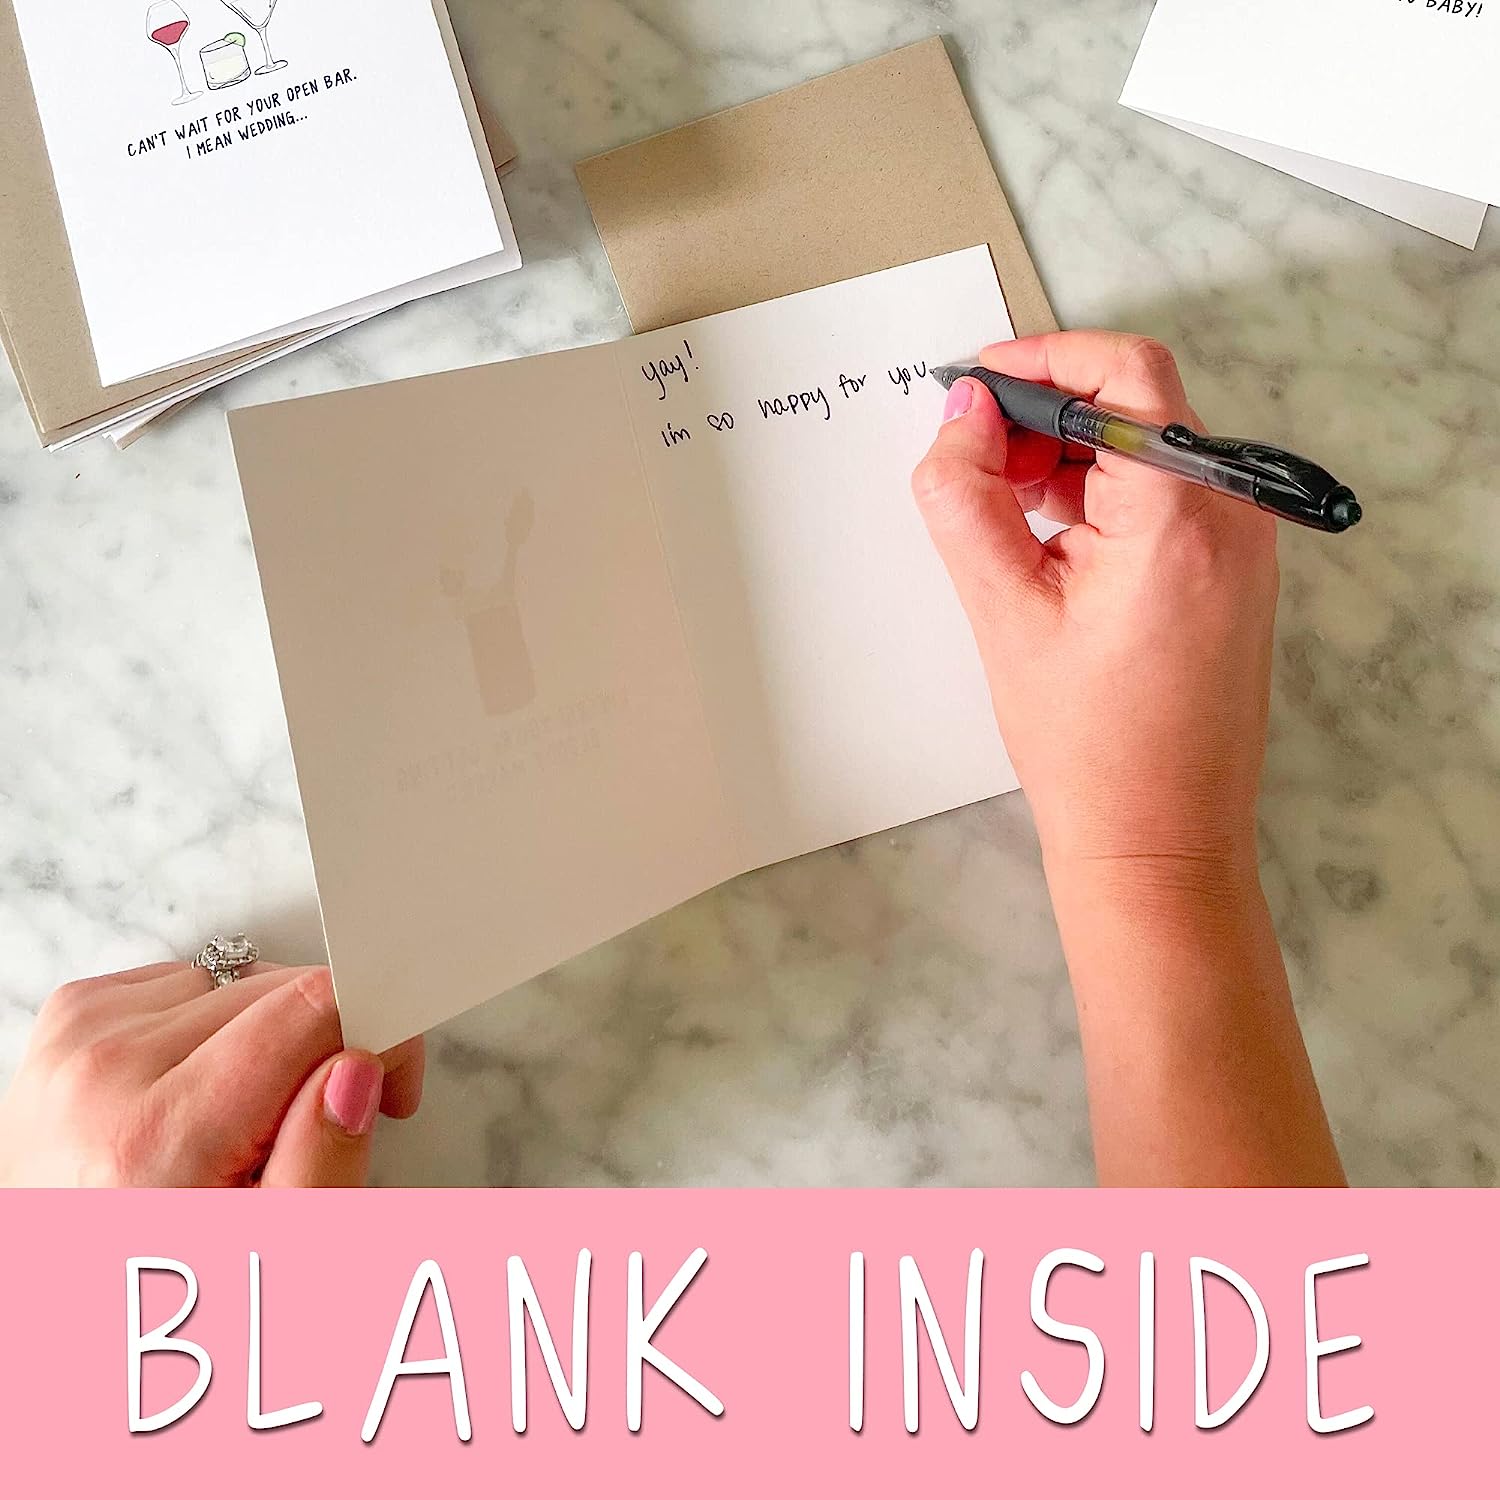 rockdoodles offers a selection of blank inside Valentine's Day cards. These heartfelt Just My Type cards come with envelopes, perfect for expressing your love and affection. Shop now to find the perfect card for your special day.